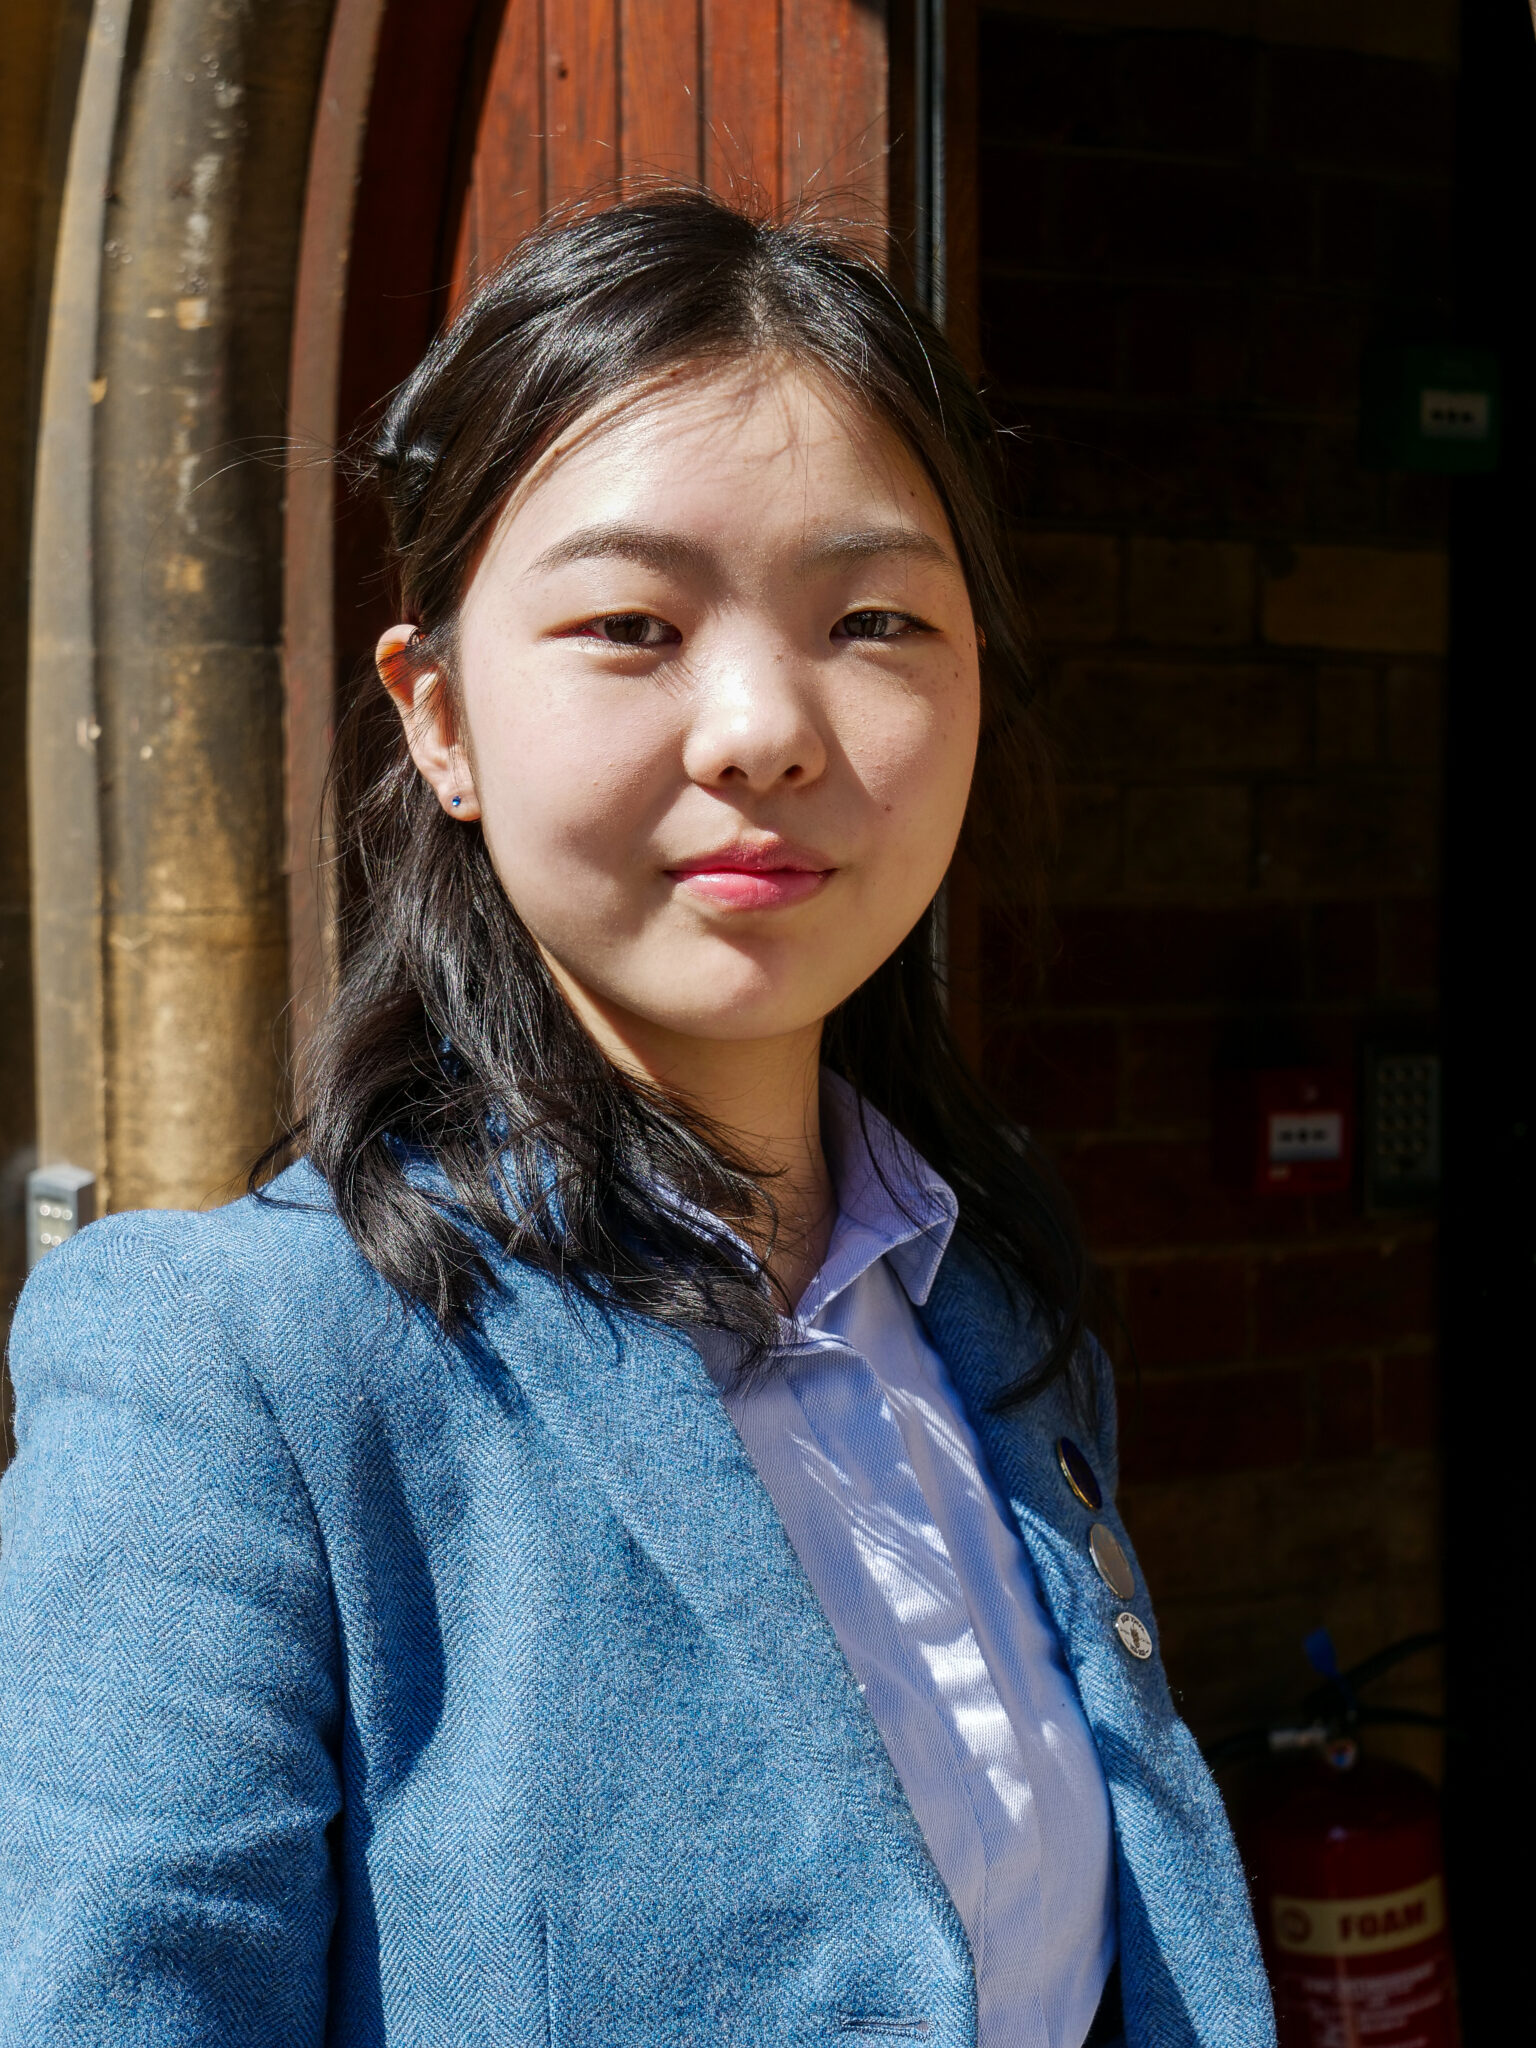 Nanako excels in UK maths competition